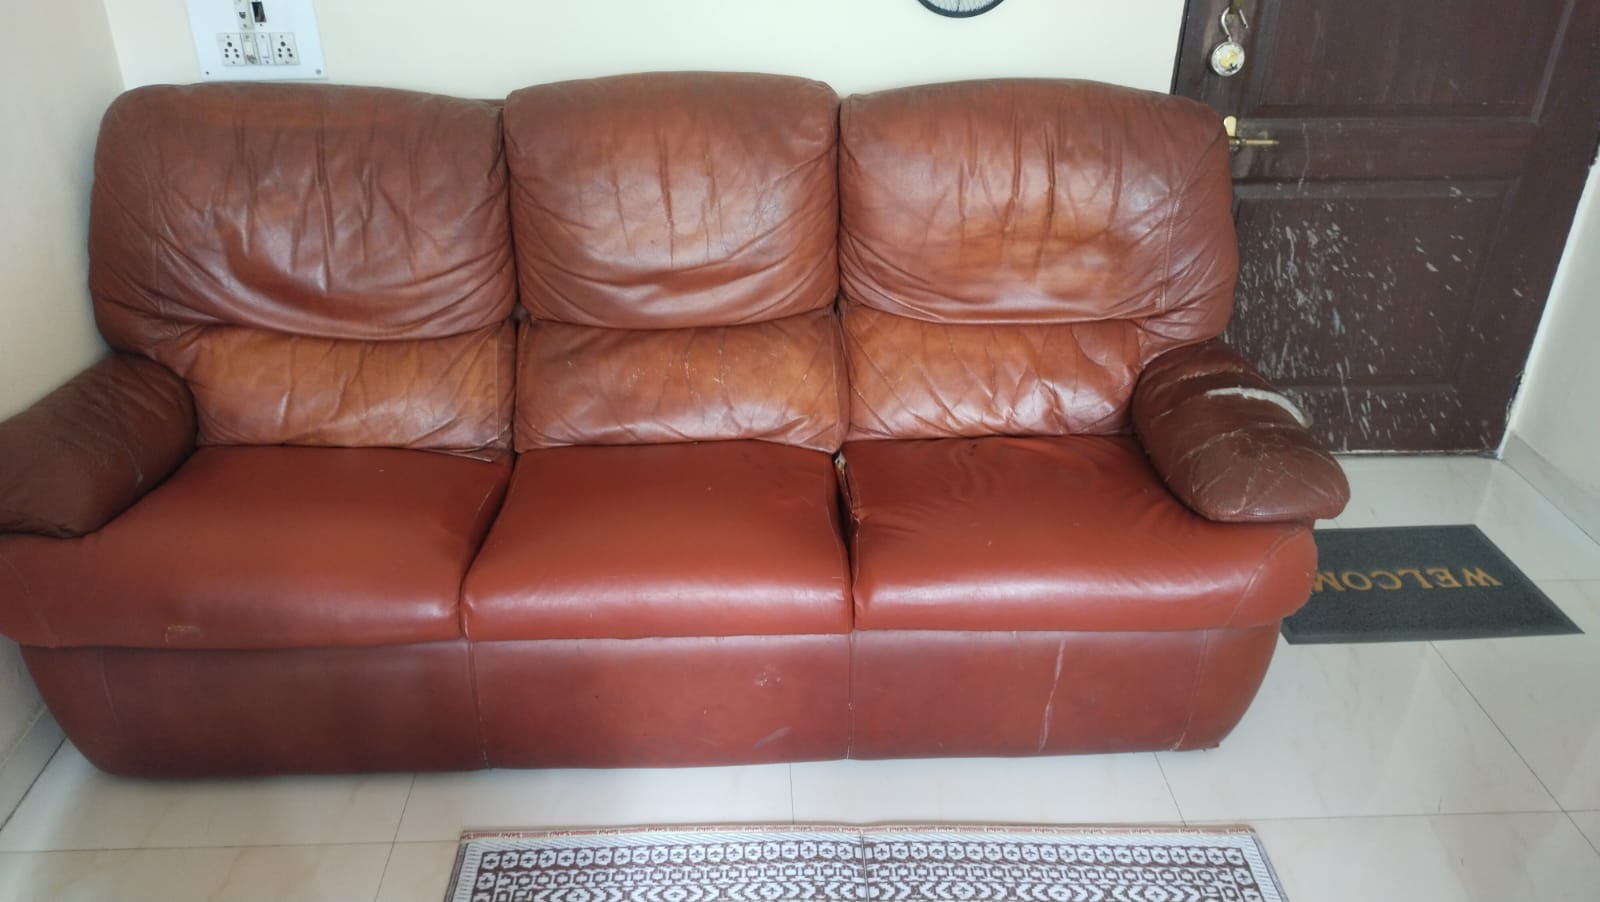 Details View - Sofa & Chairs photos - reseller,reseller marketplace,advetising your products,reseller bazzar,resellerbazzar.in,india's classified site,2 recliner chairs & a Sofa